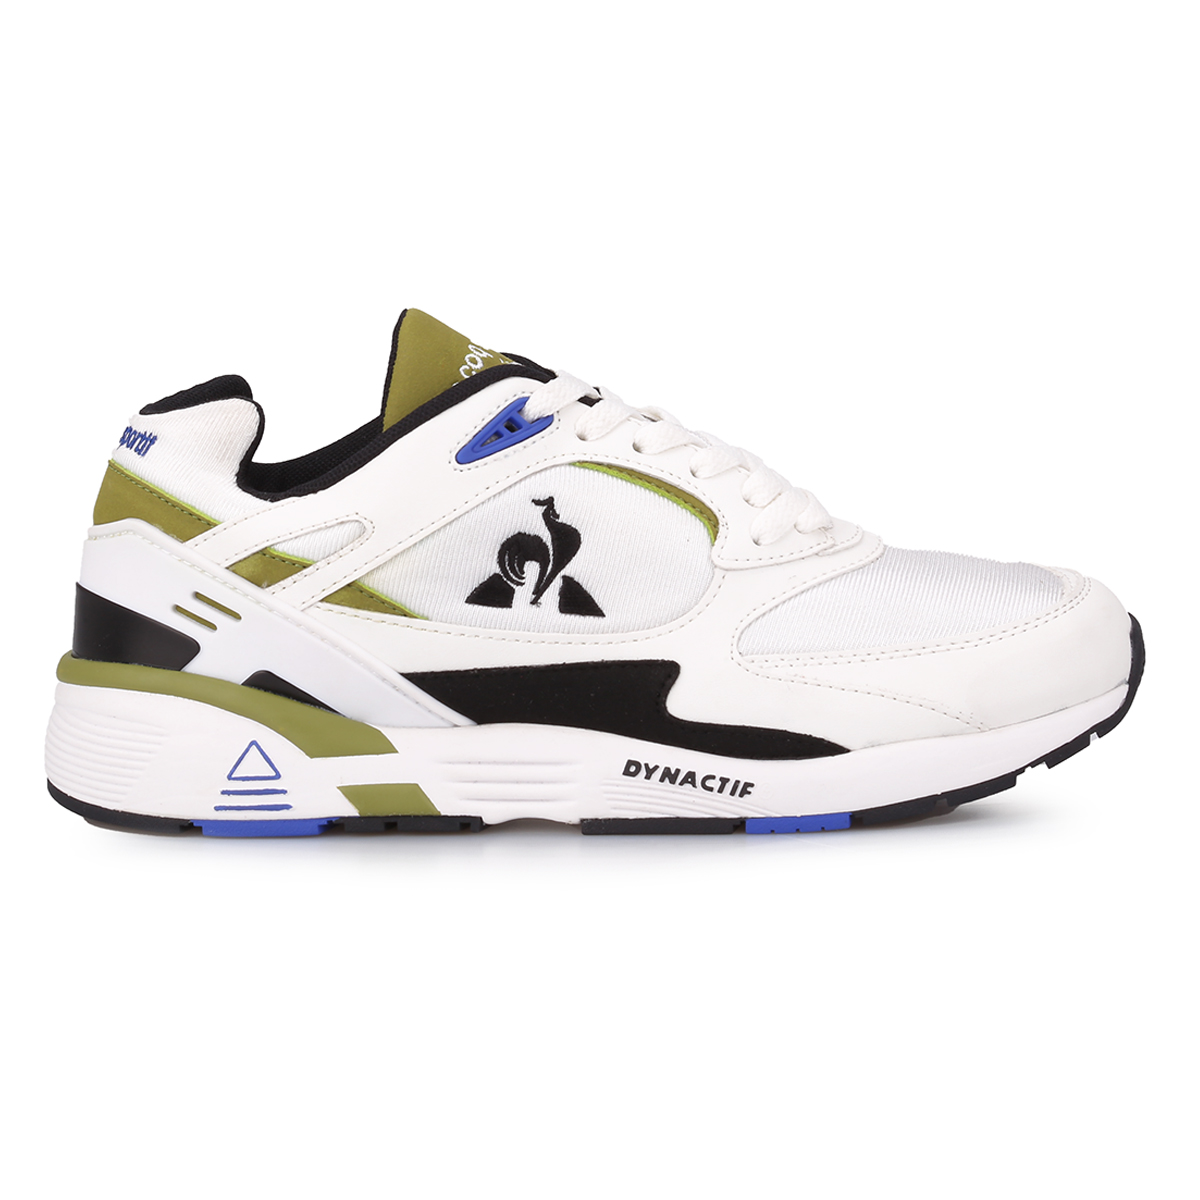 Zapatillas Le Coq Sportif Lcs R1100 Colors,  image number null